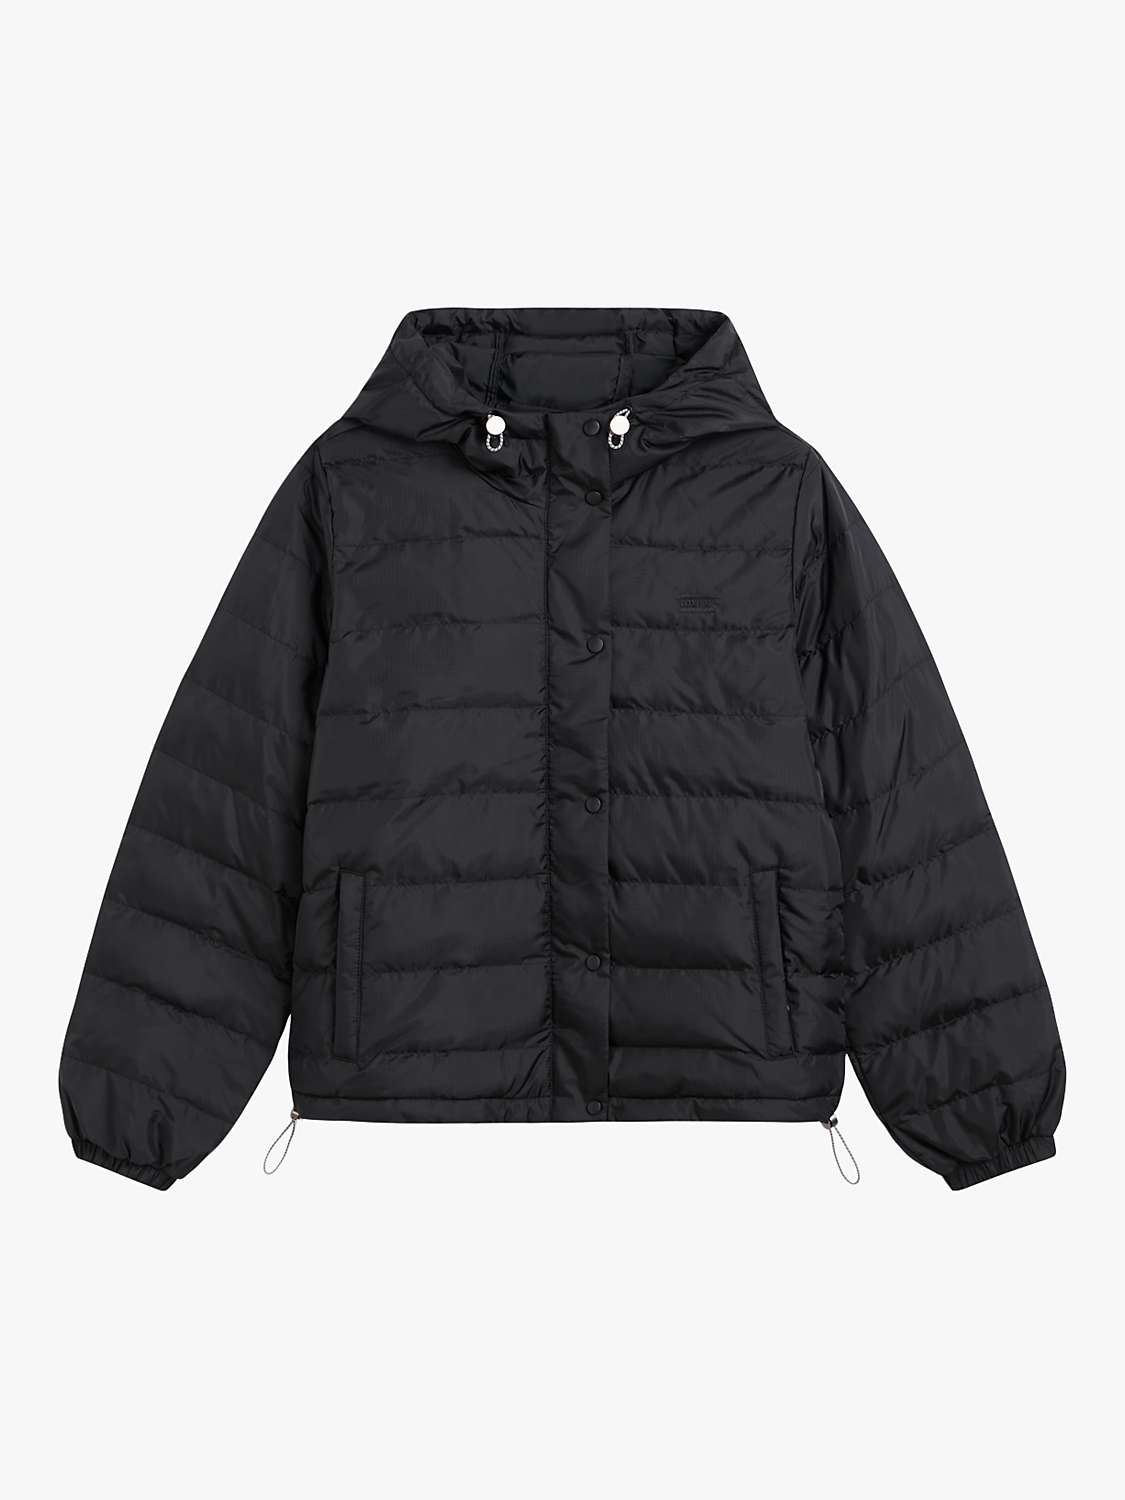 Buy Levi's Edie Packable Quilted Jacket Online at johnlewis.com